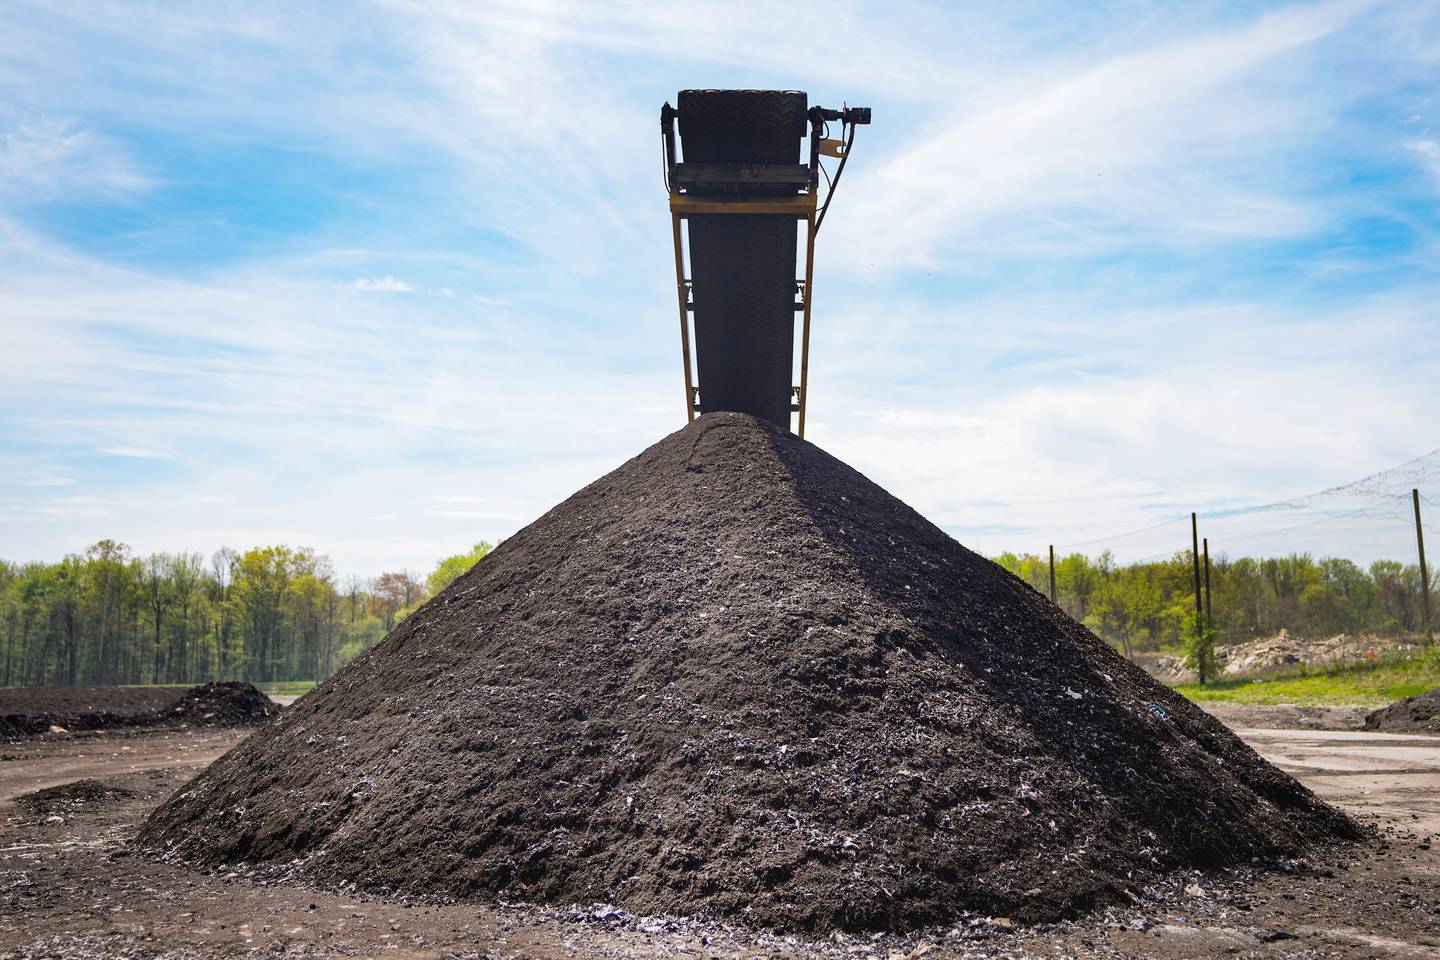 Freshly screened composted soil sits in the Eastern Sanitary Landfill Solid Waste Management Facility  plant in White Marsh, MD., April 14, 2023.